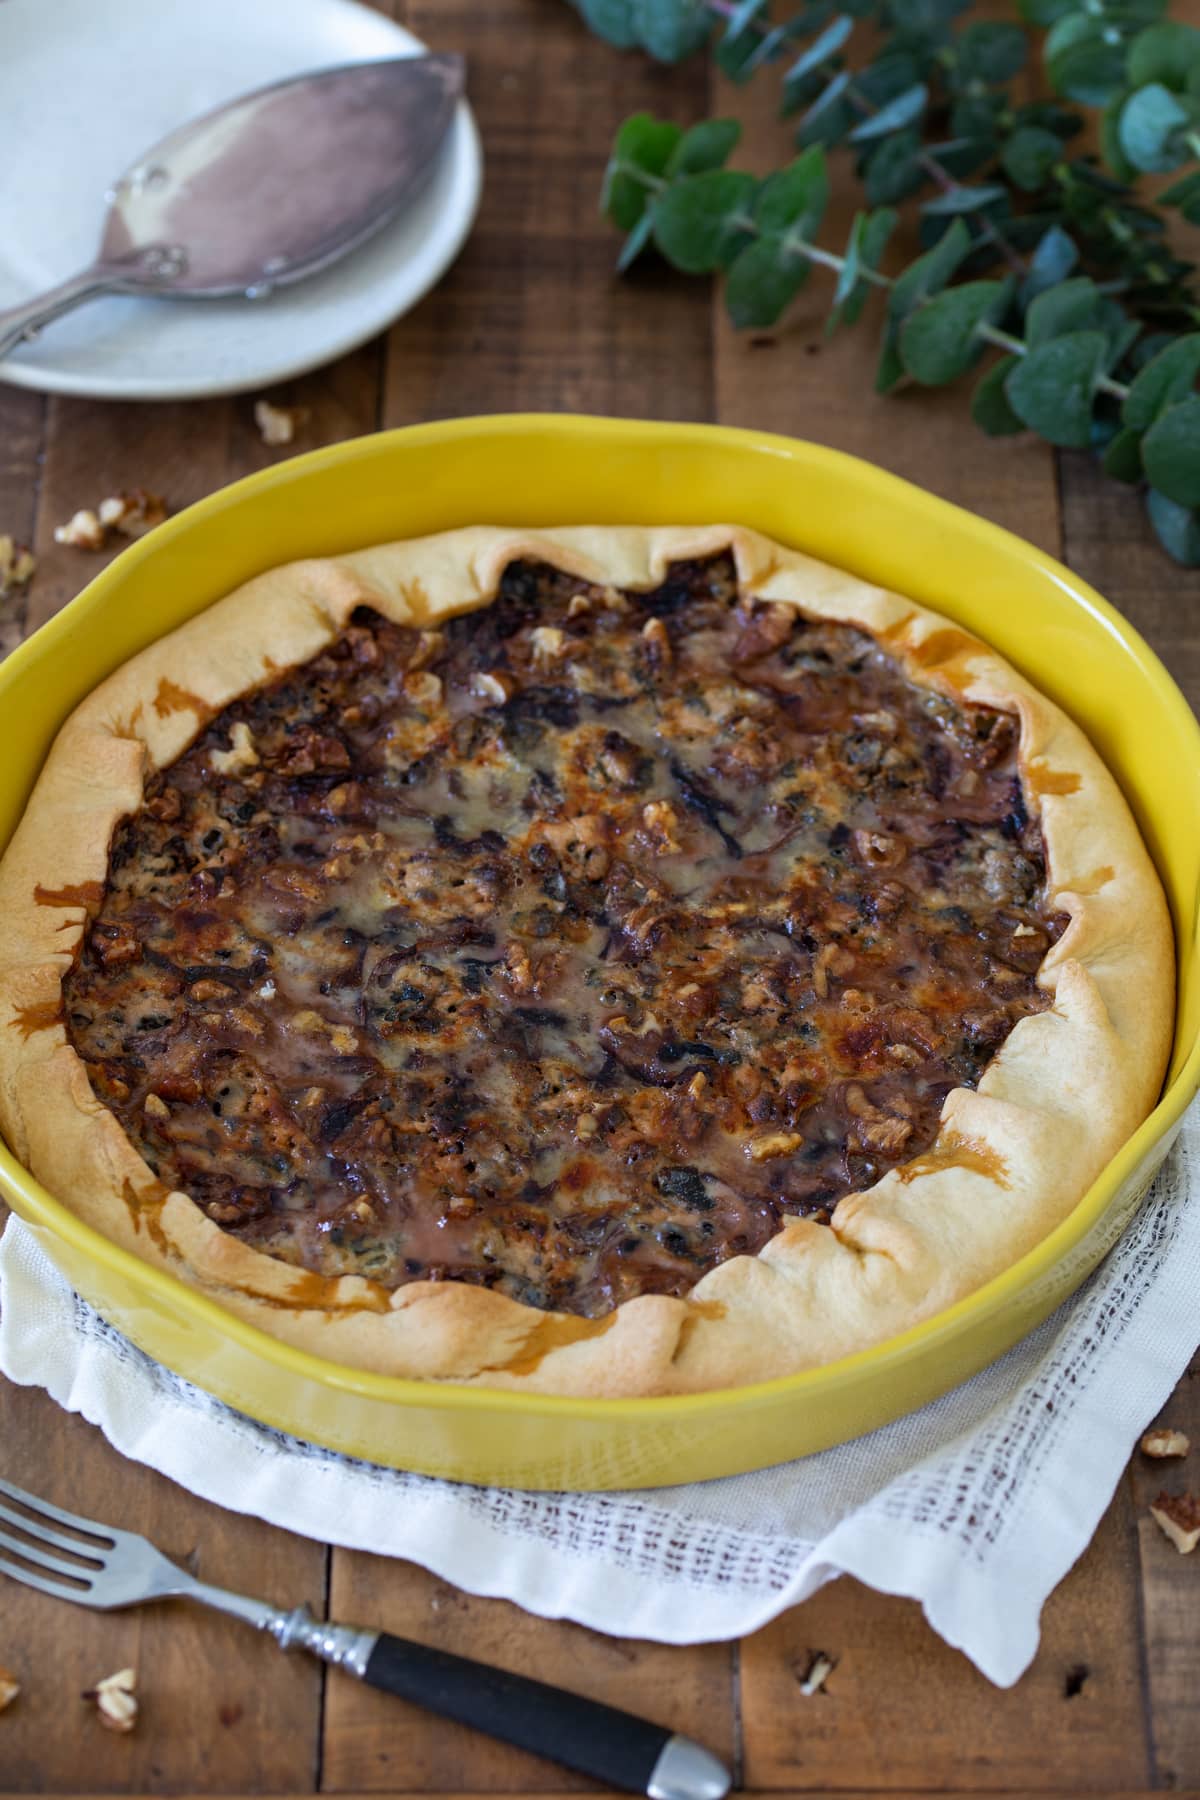 Radicchio and blue cheese quiche in a yellow ceramic pan.